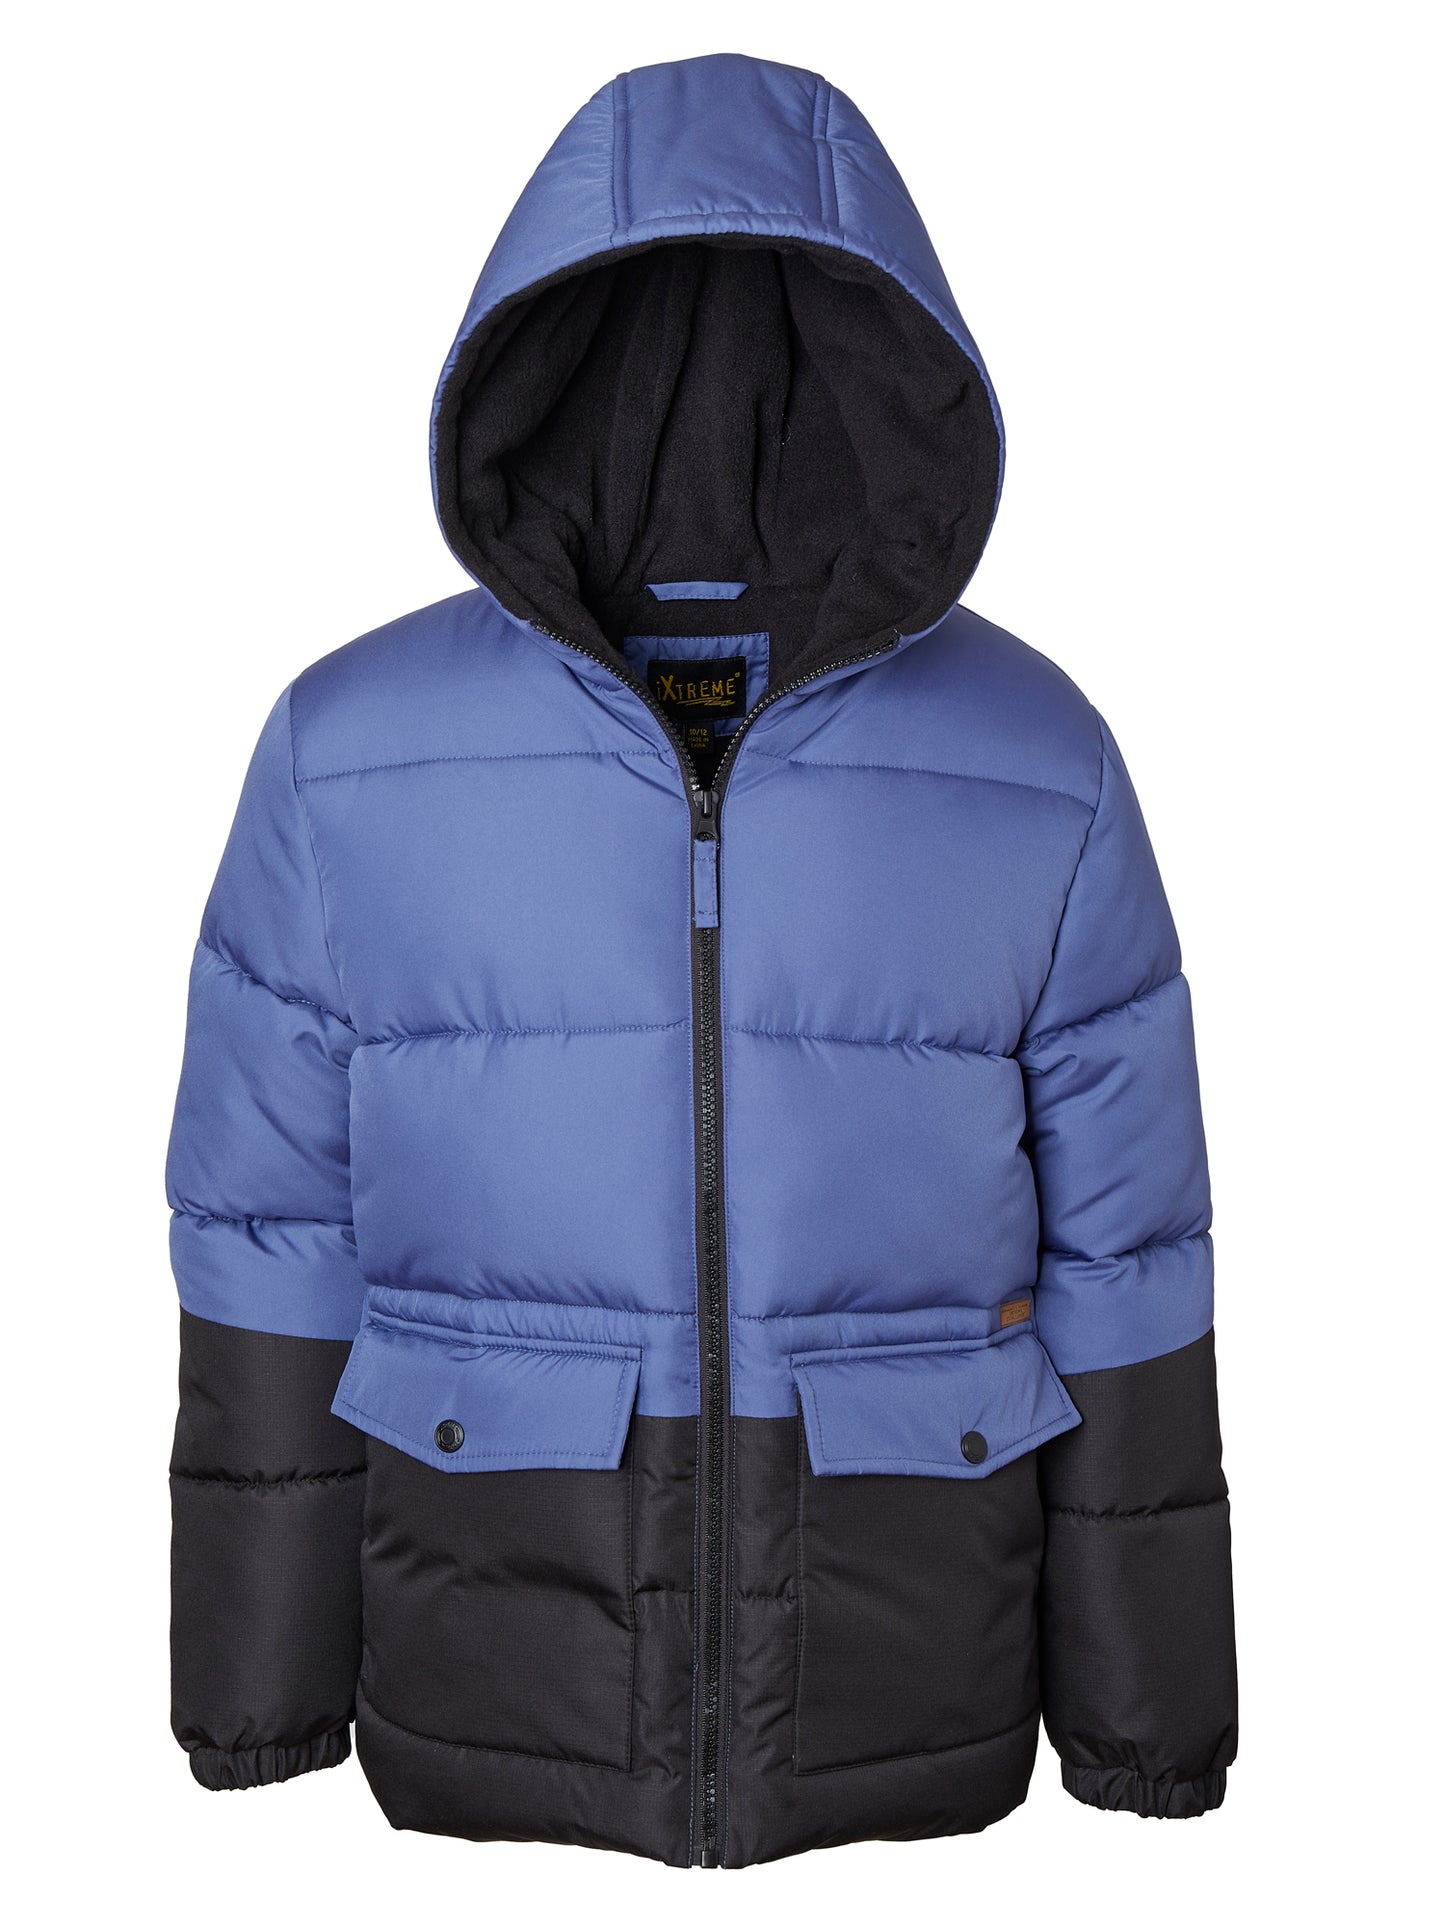 Boys Hooded Colorblock Puffer Winter jacket- ZB139